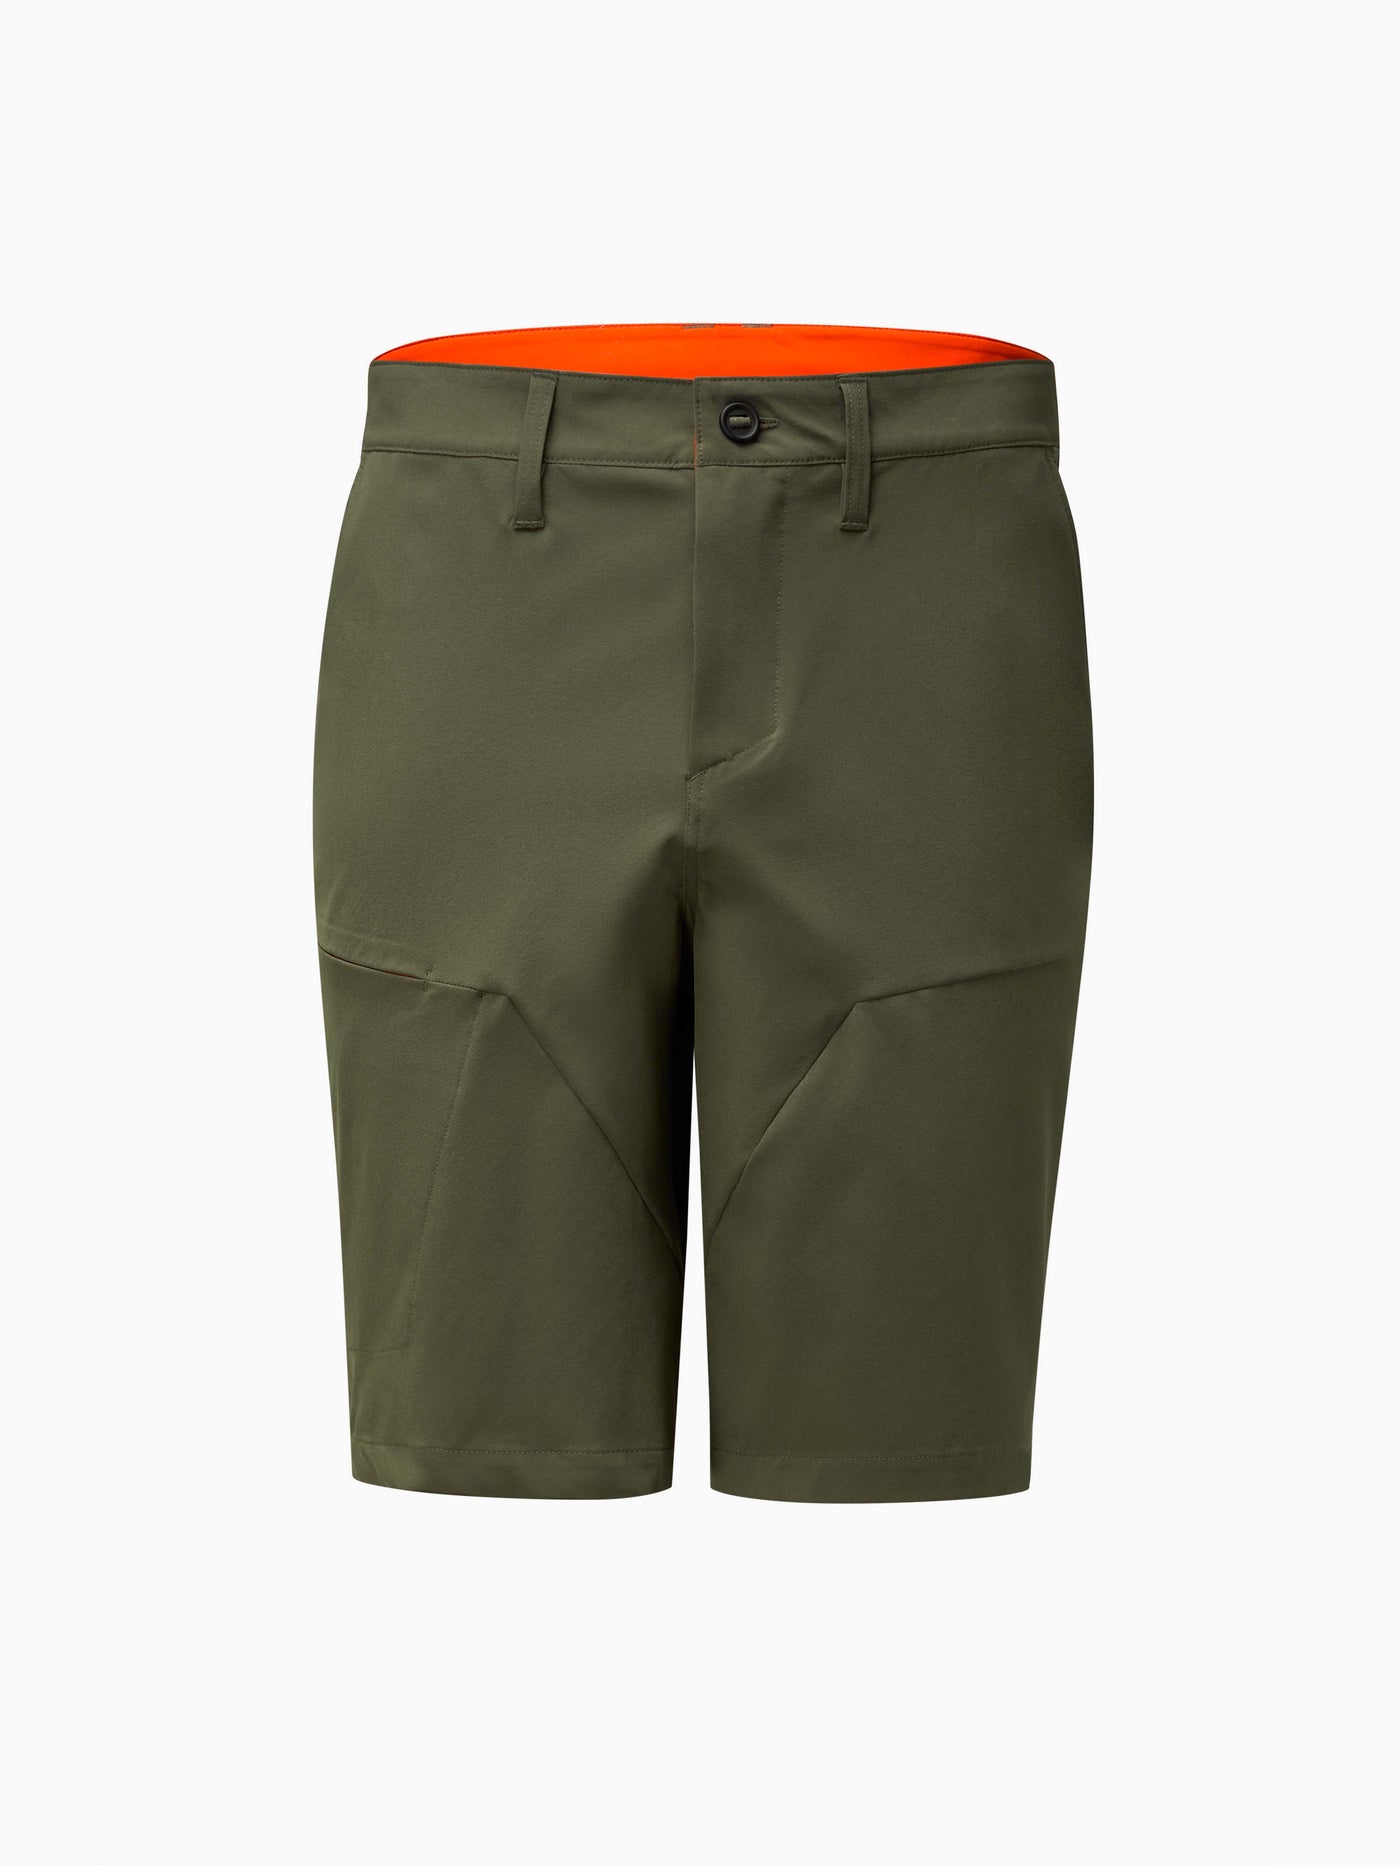 CHPT3 Mens Tech Shorts in Green Colour Front View #color_forest-green